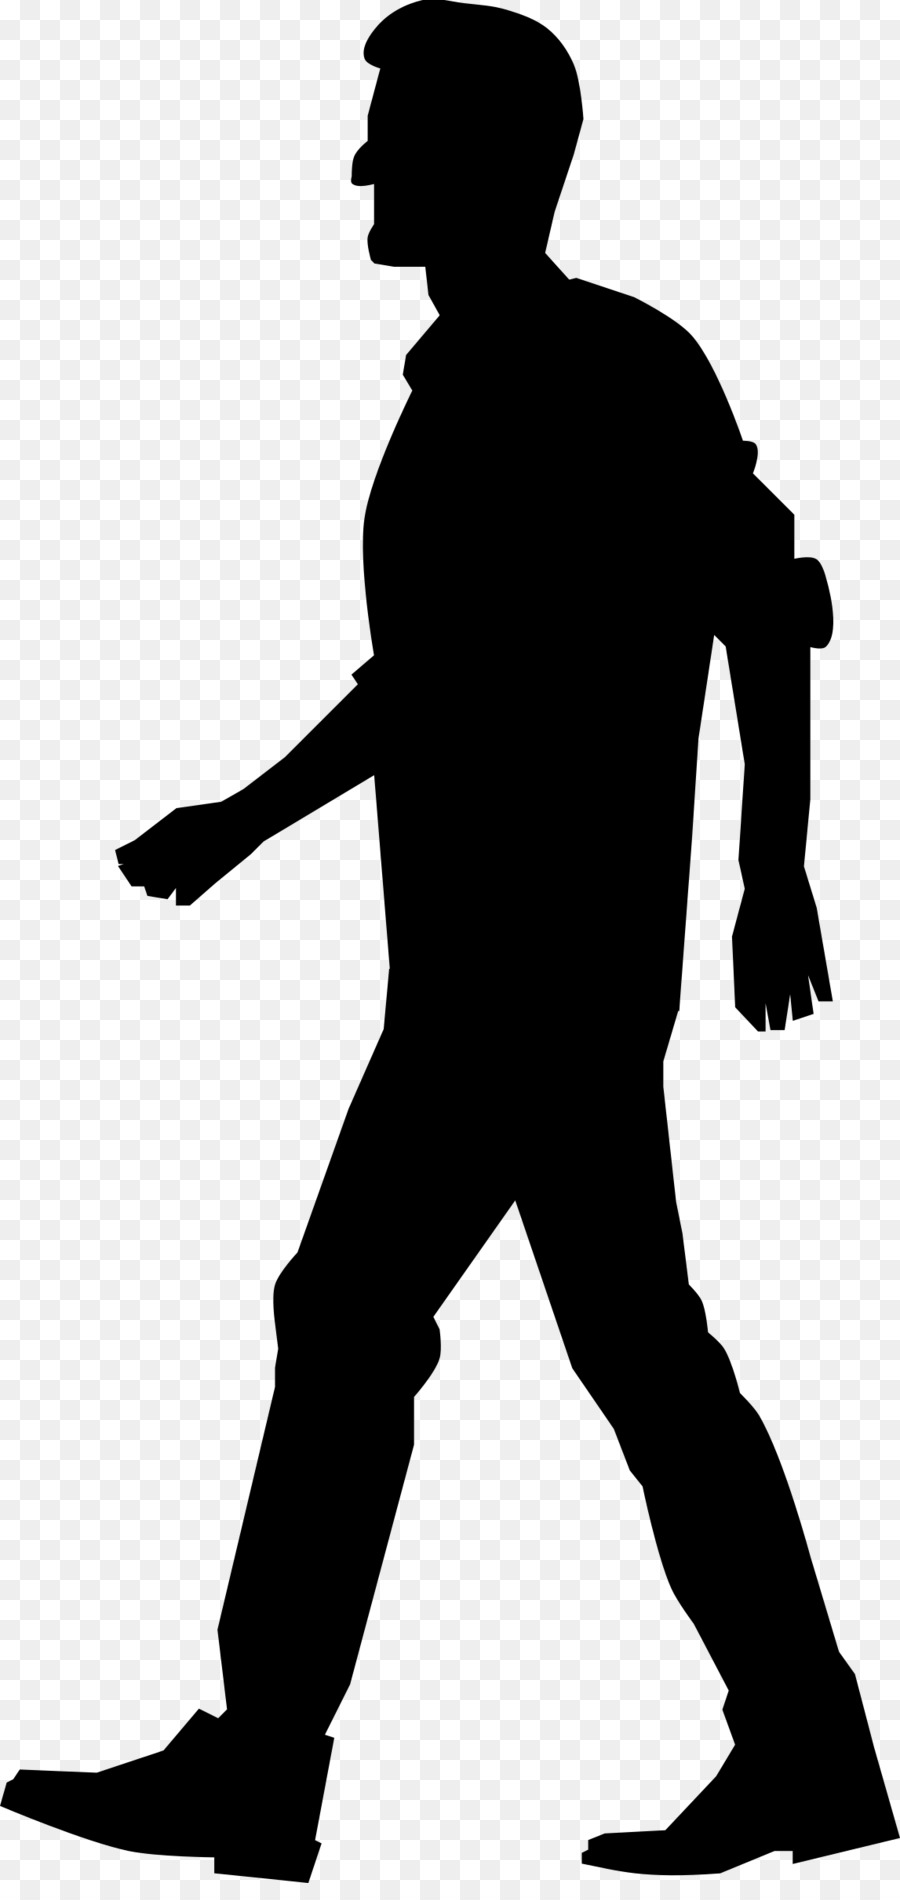 Free Science Cliparts Black, Download Free Clip Art, Free ... Silhouette Man Walking Tunnel